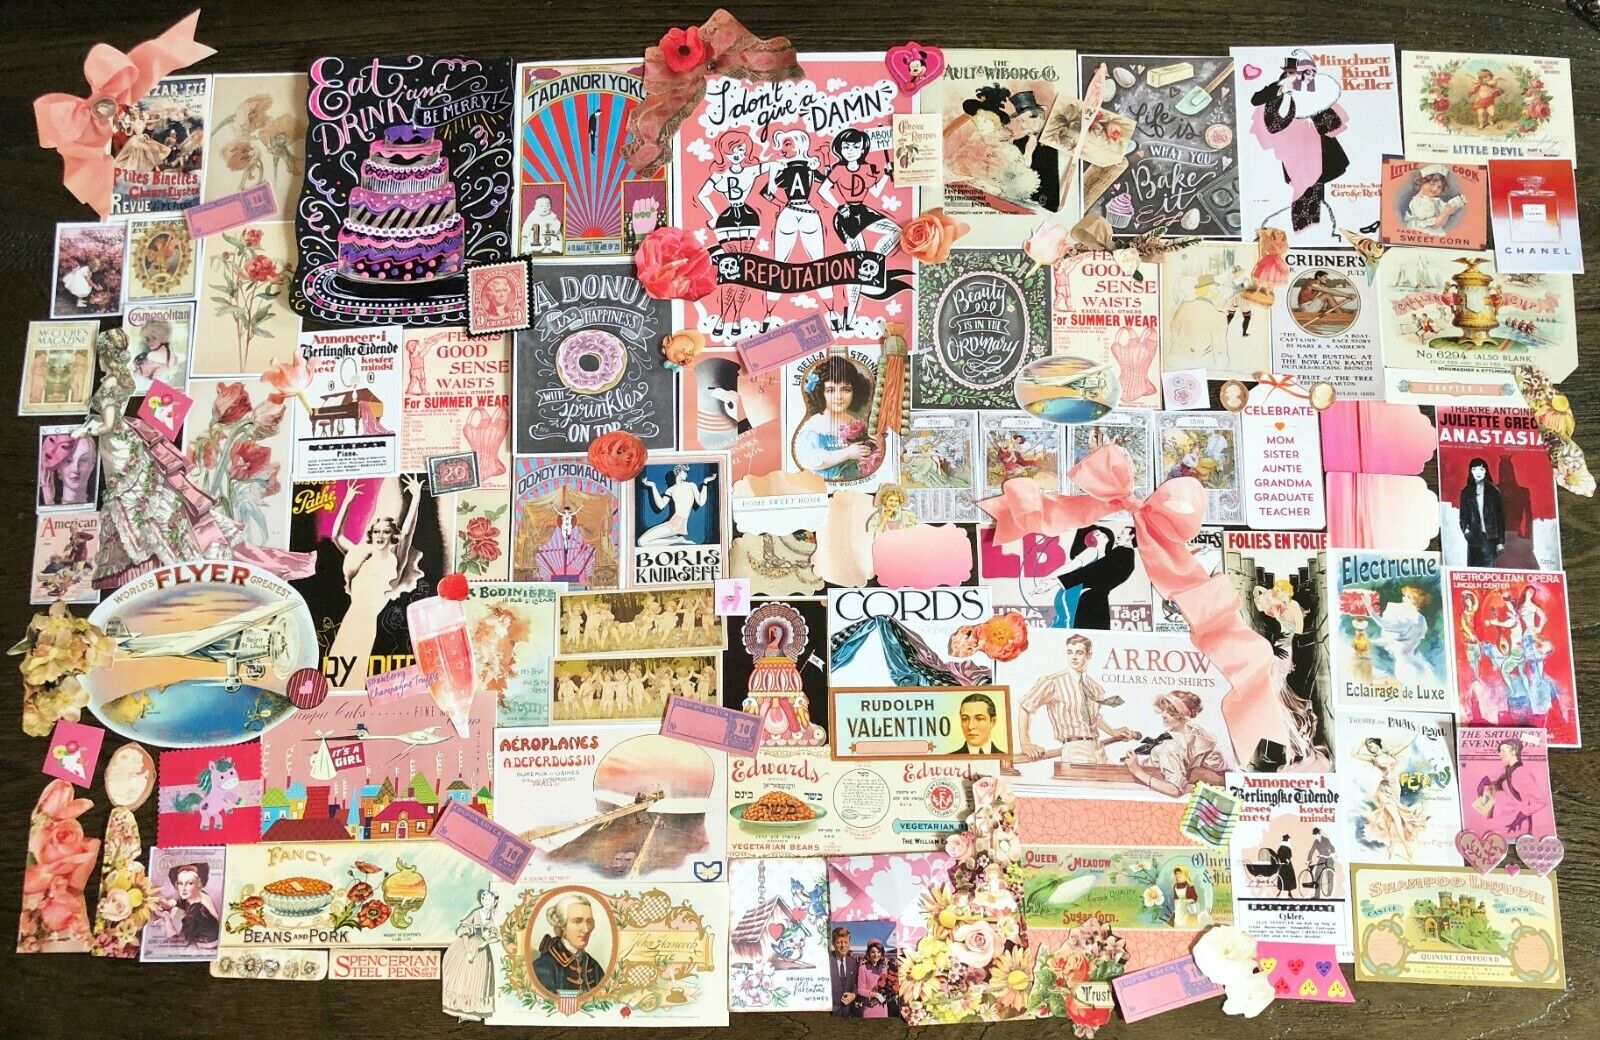 125pc PINK Scrap Lot~Junk Journal Collage Art Paper Pack~Vtg Images,Labels,Ads++ all hand cut and assembled with love by me :o)